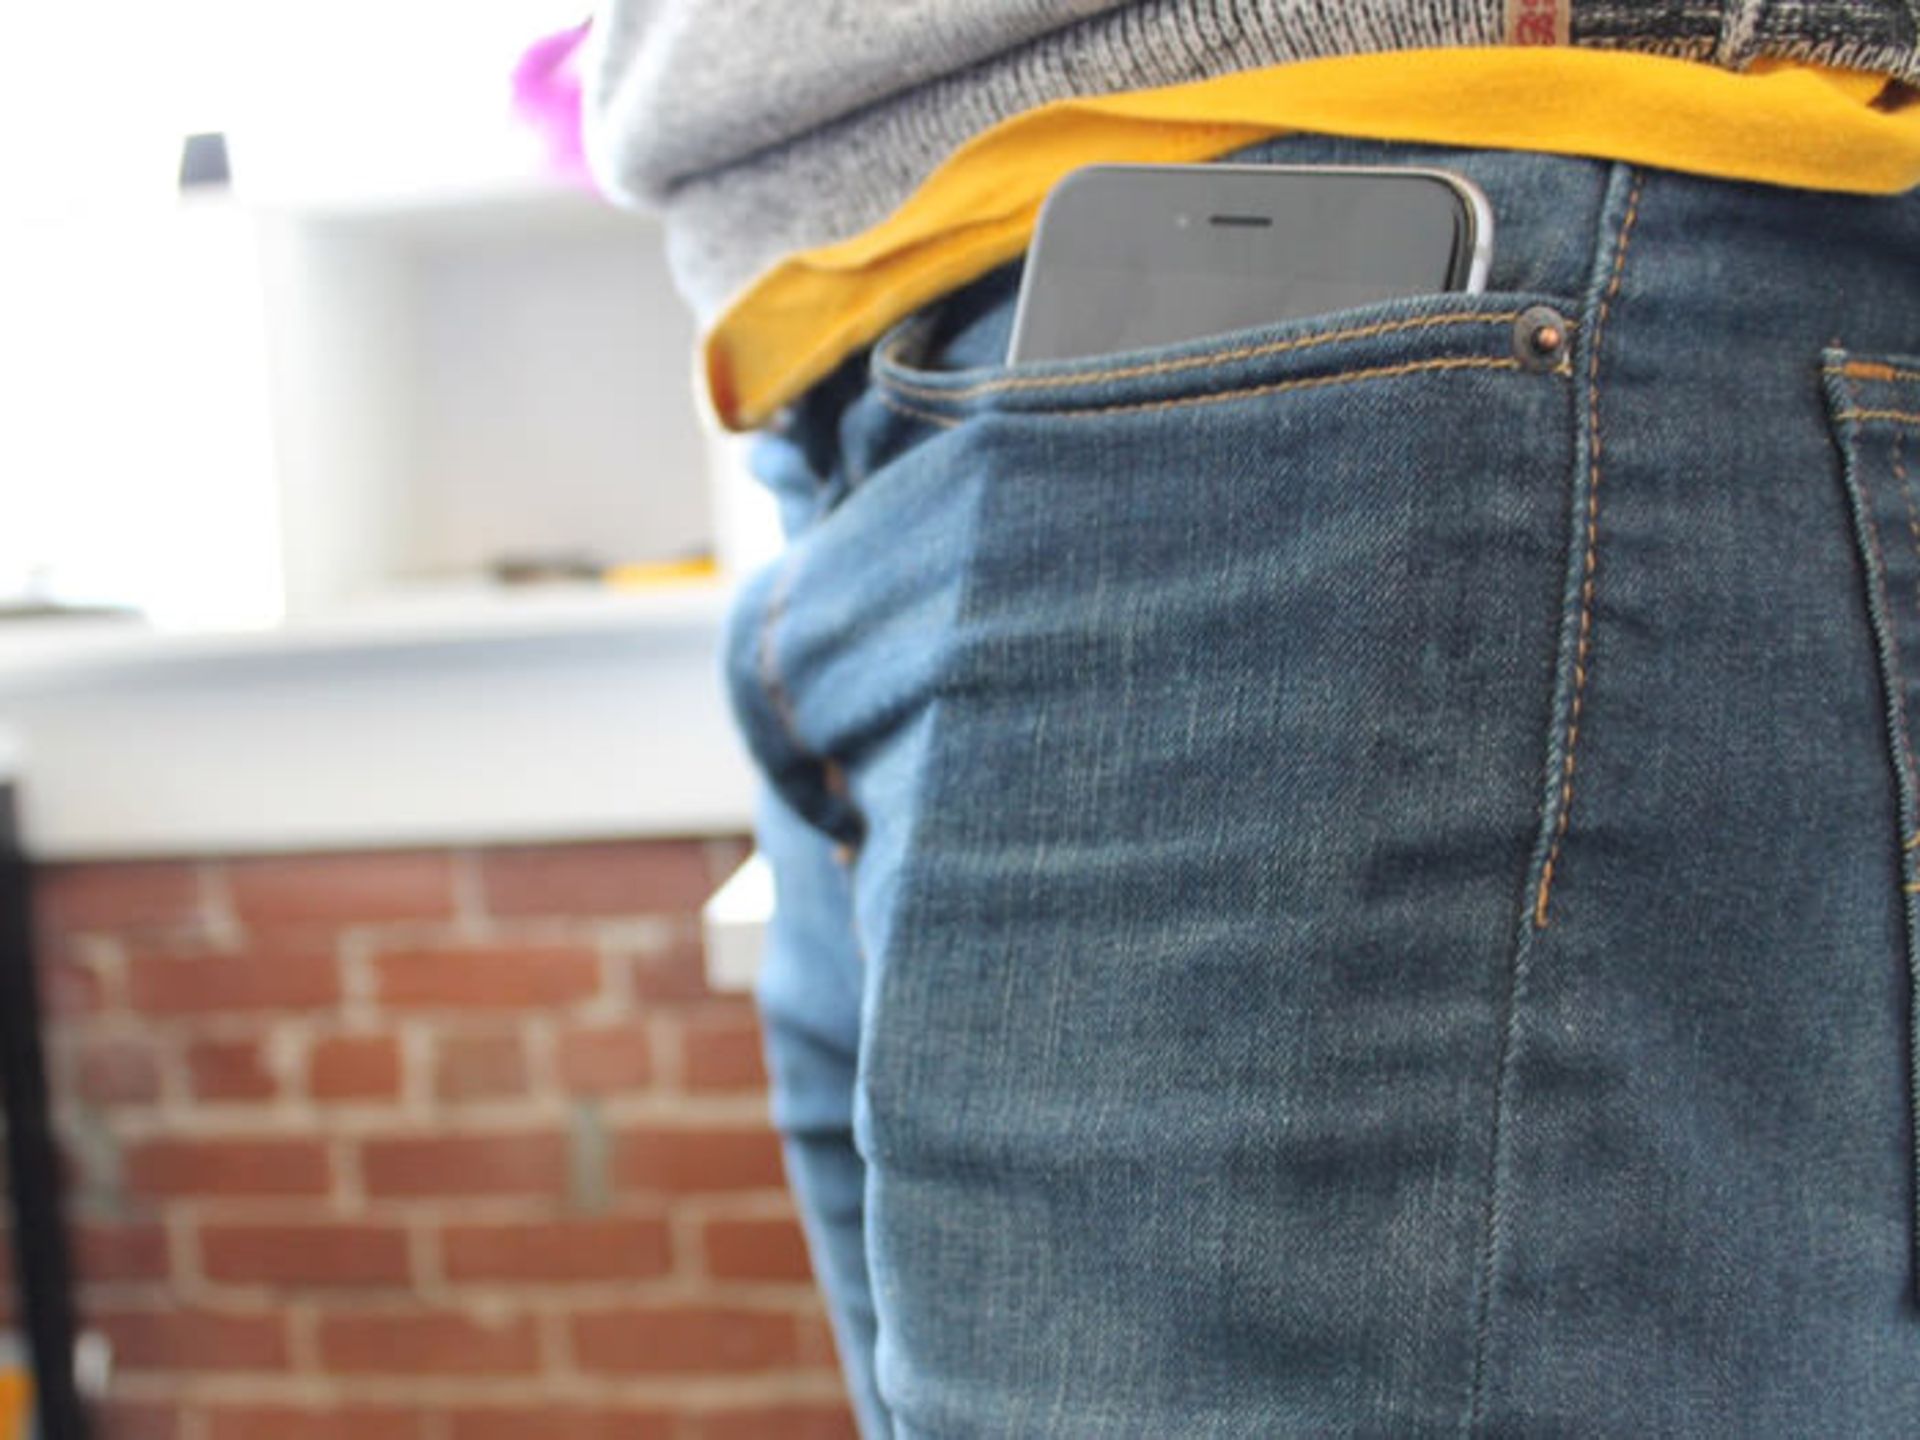 depending-on-what-kind-of-pants-you-wear-the-iphone-6-plus-may-stick-out-of-your-jeans-pocket